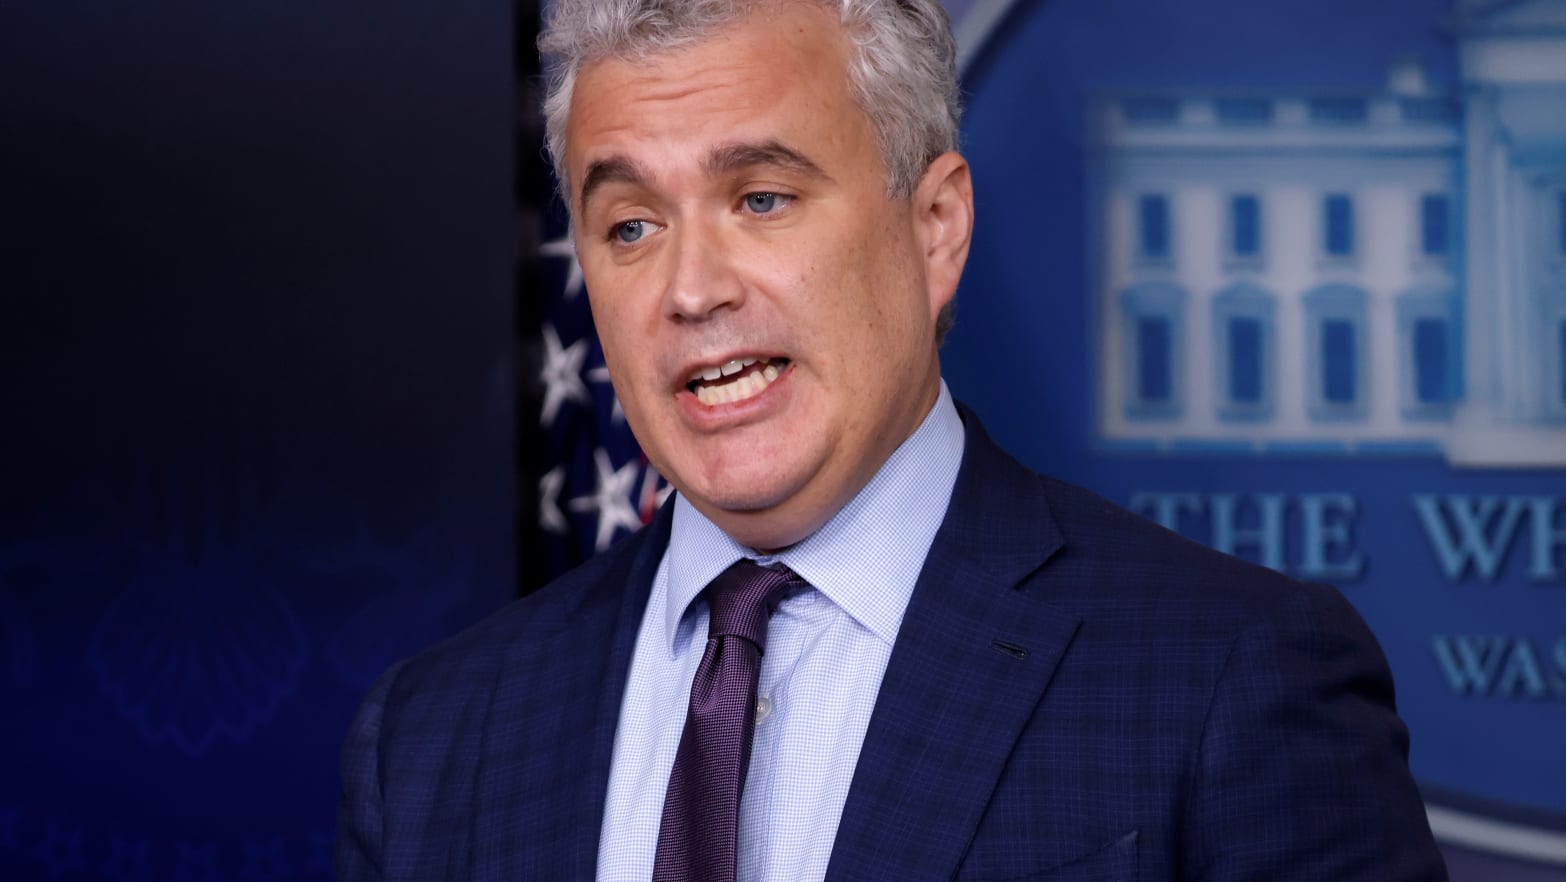 Jeff Zients speaks at a press briefing in the White House.